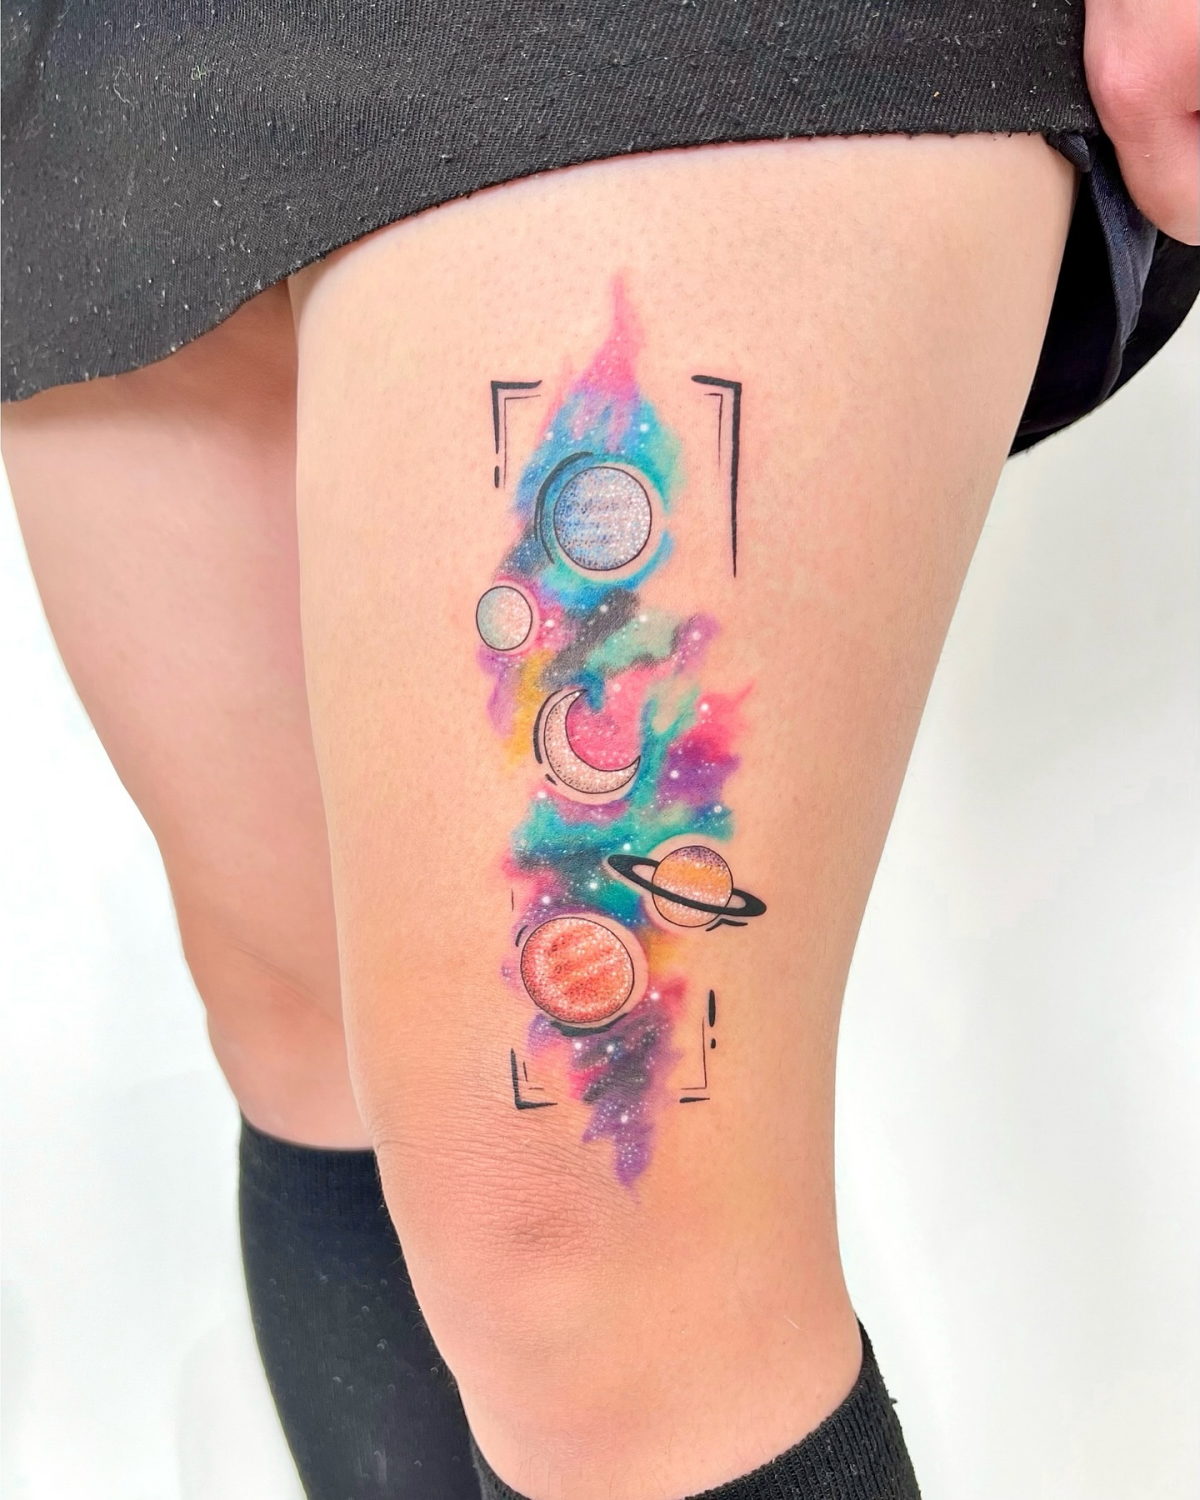 50+ Galaxy Tattoo Ideas That Capture the Beauty of the Cosmos